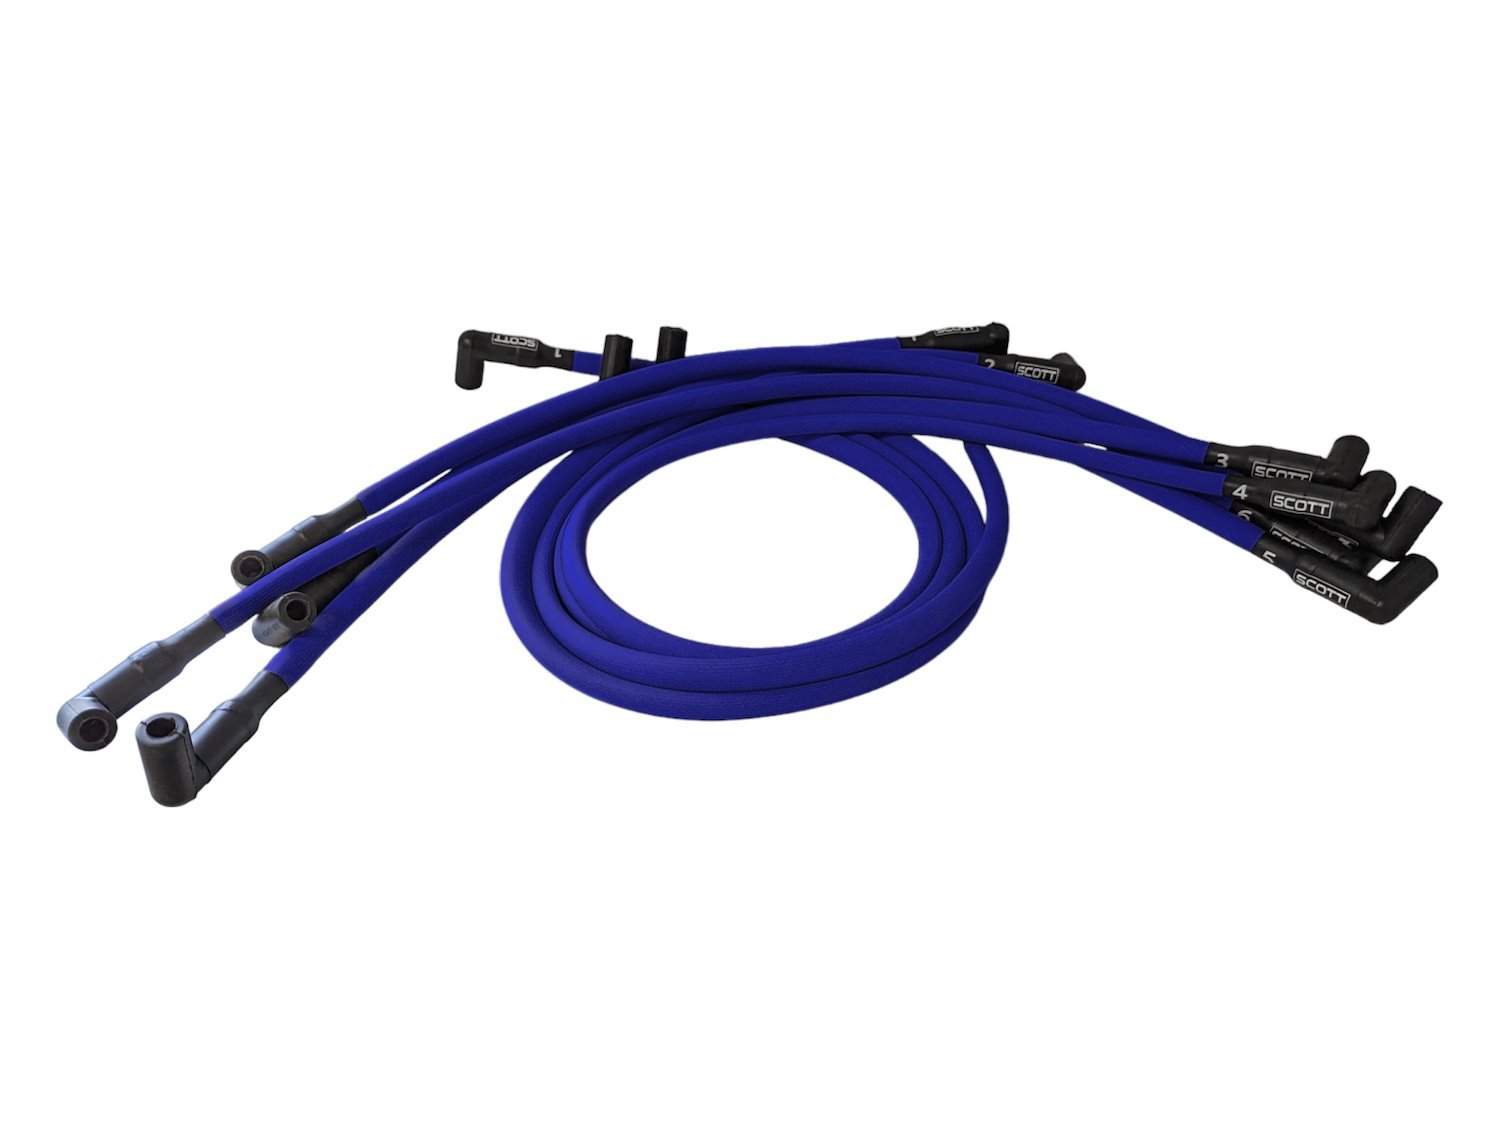 SPW-PS-435-3 High-Performance Fiberglass-Oversleeved Spark Plug Wire Set for Small Block Chevy, Around Front [Blue]